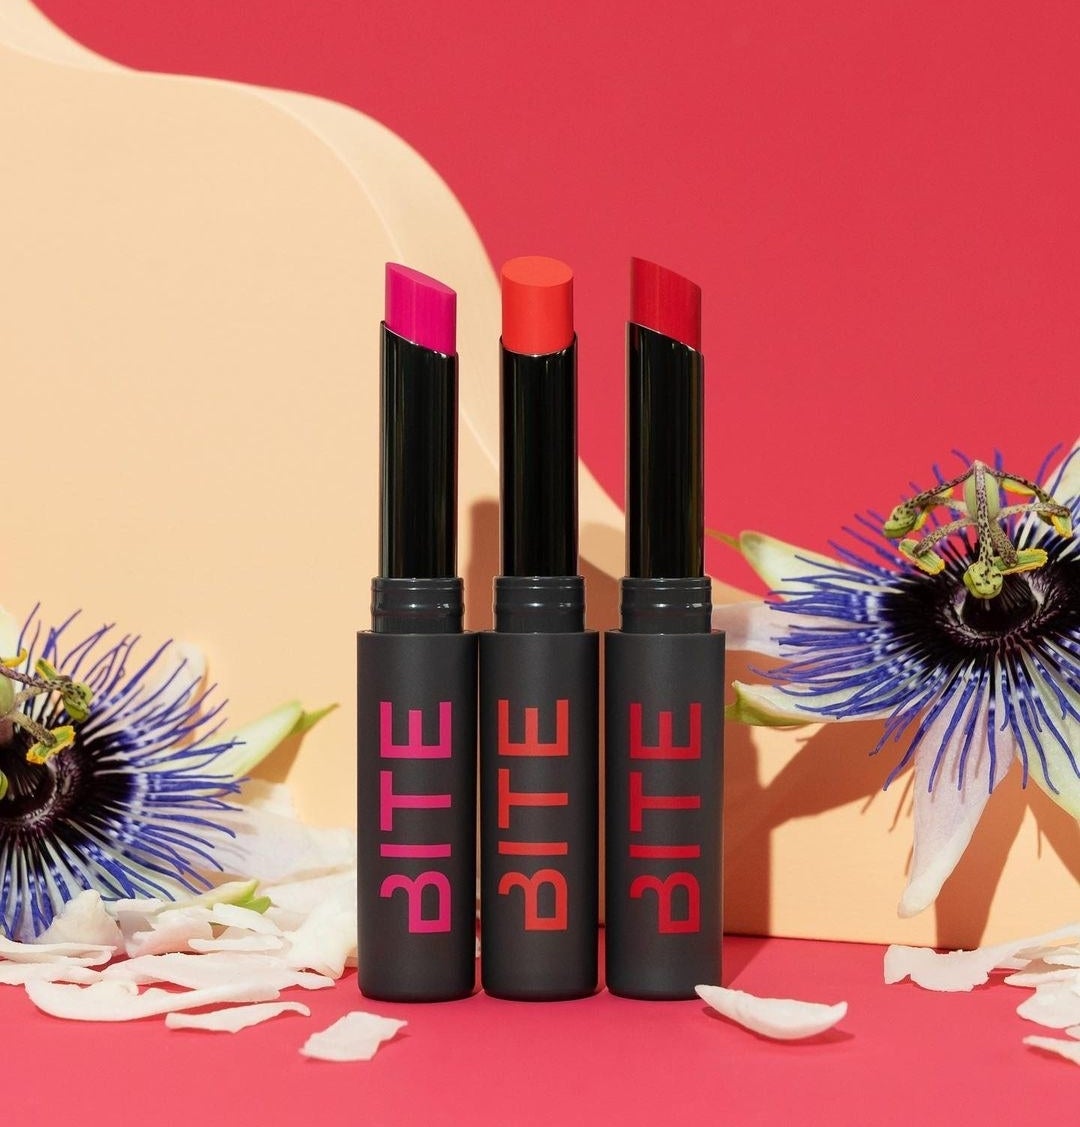 A trio of highly-pigmented lip sticks against a floral backdrop